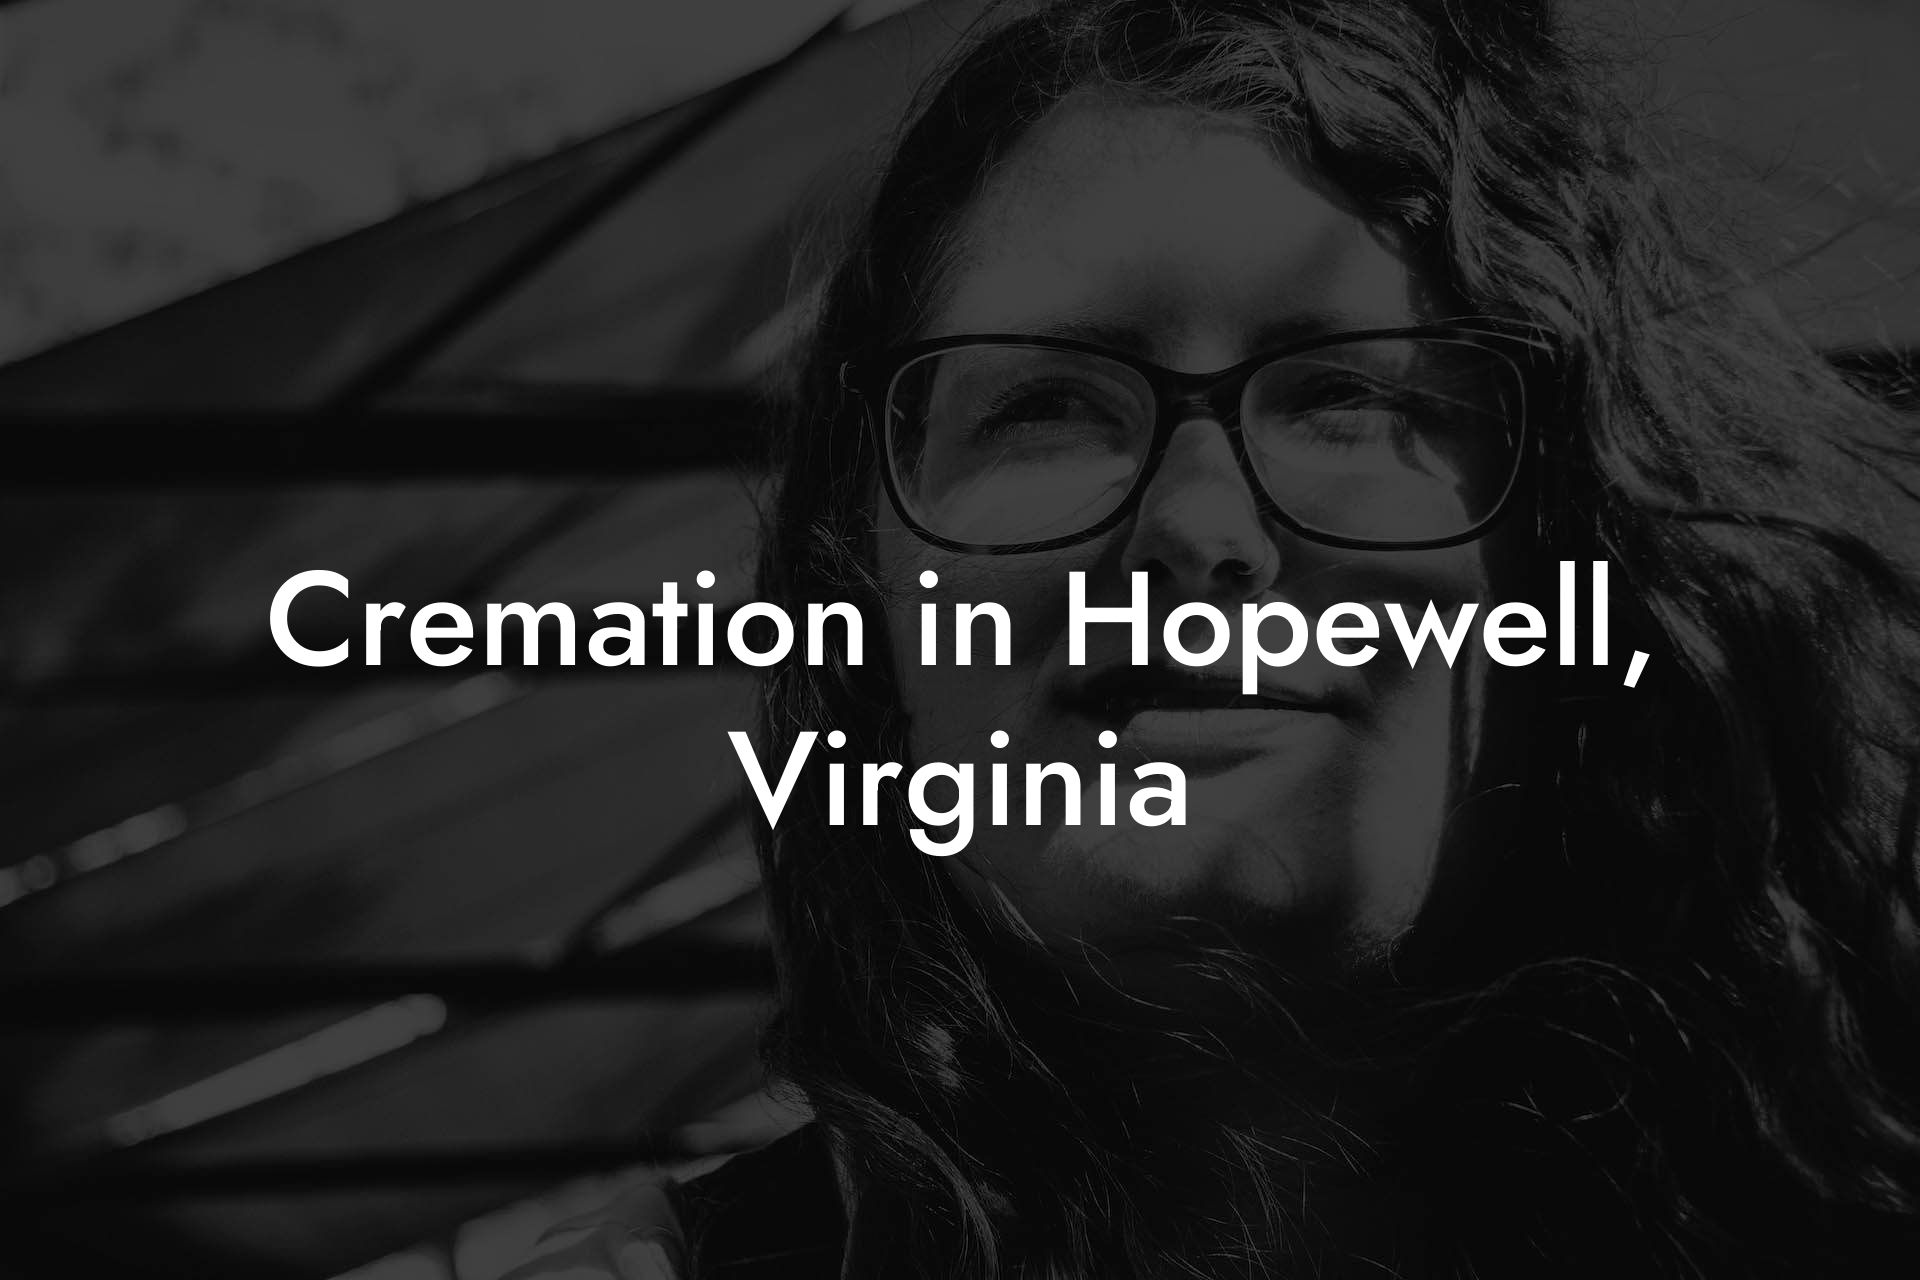 Cremation in Hopewell, Virginia